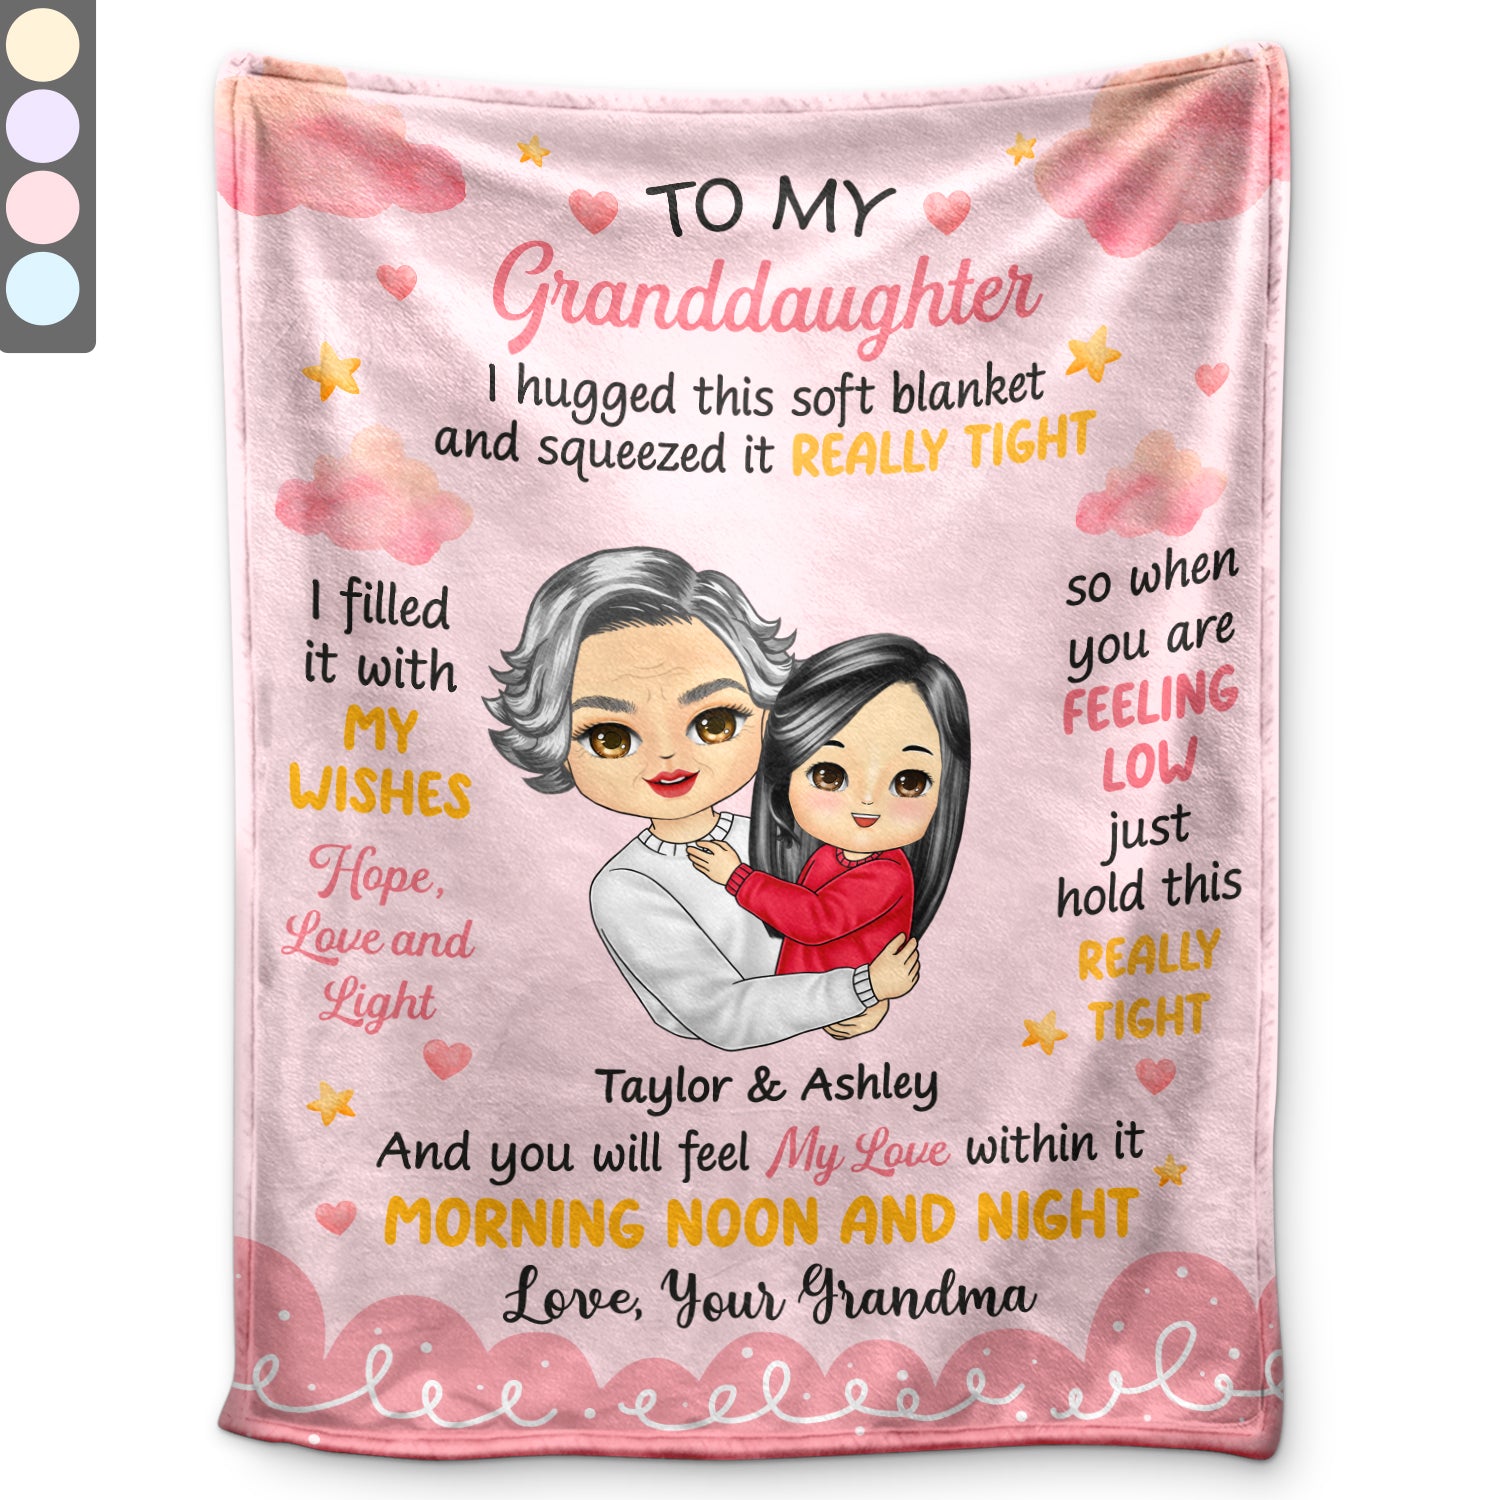 You Will Feel My Love Within It - Gift For Granddaughter, Grandson, Kids - Personalized Fleece Blanket